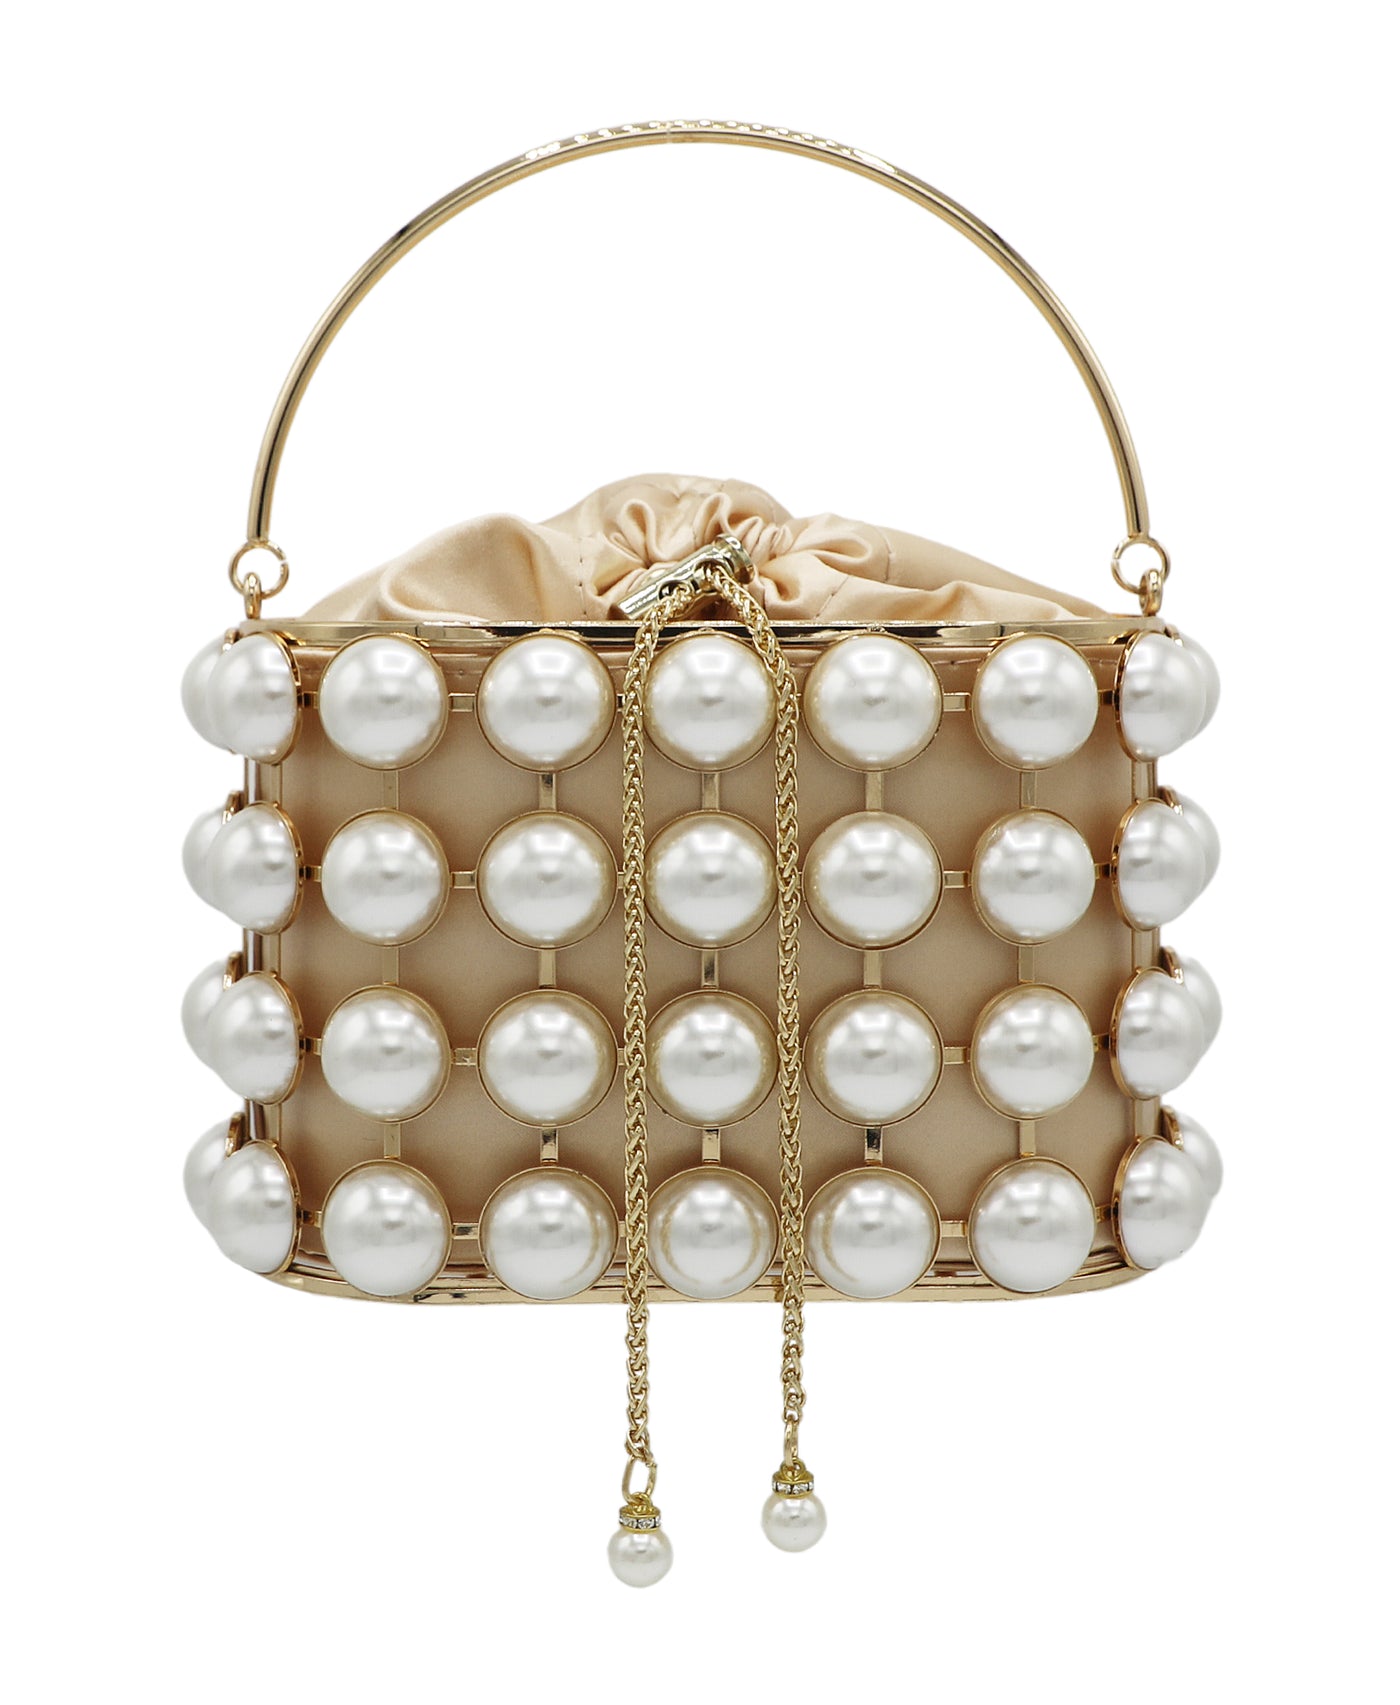 Faux Pearl Bucket Evening Bag image 1